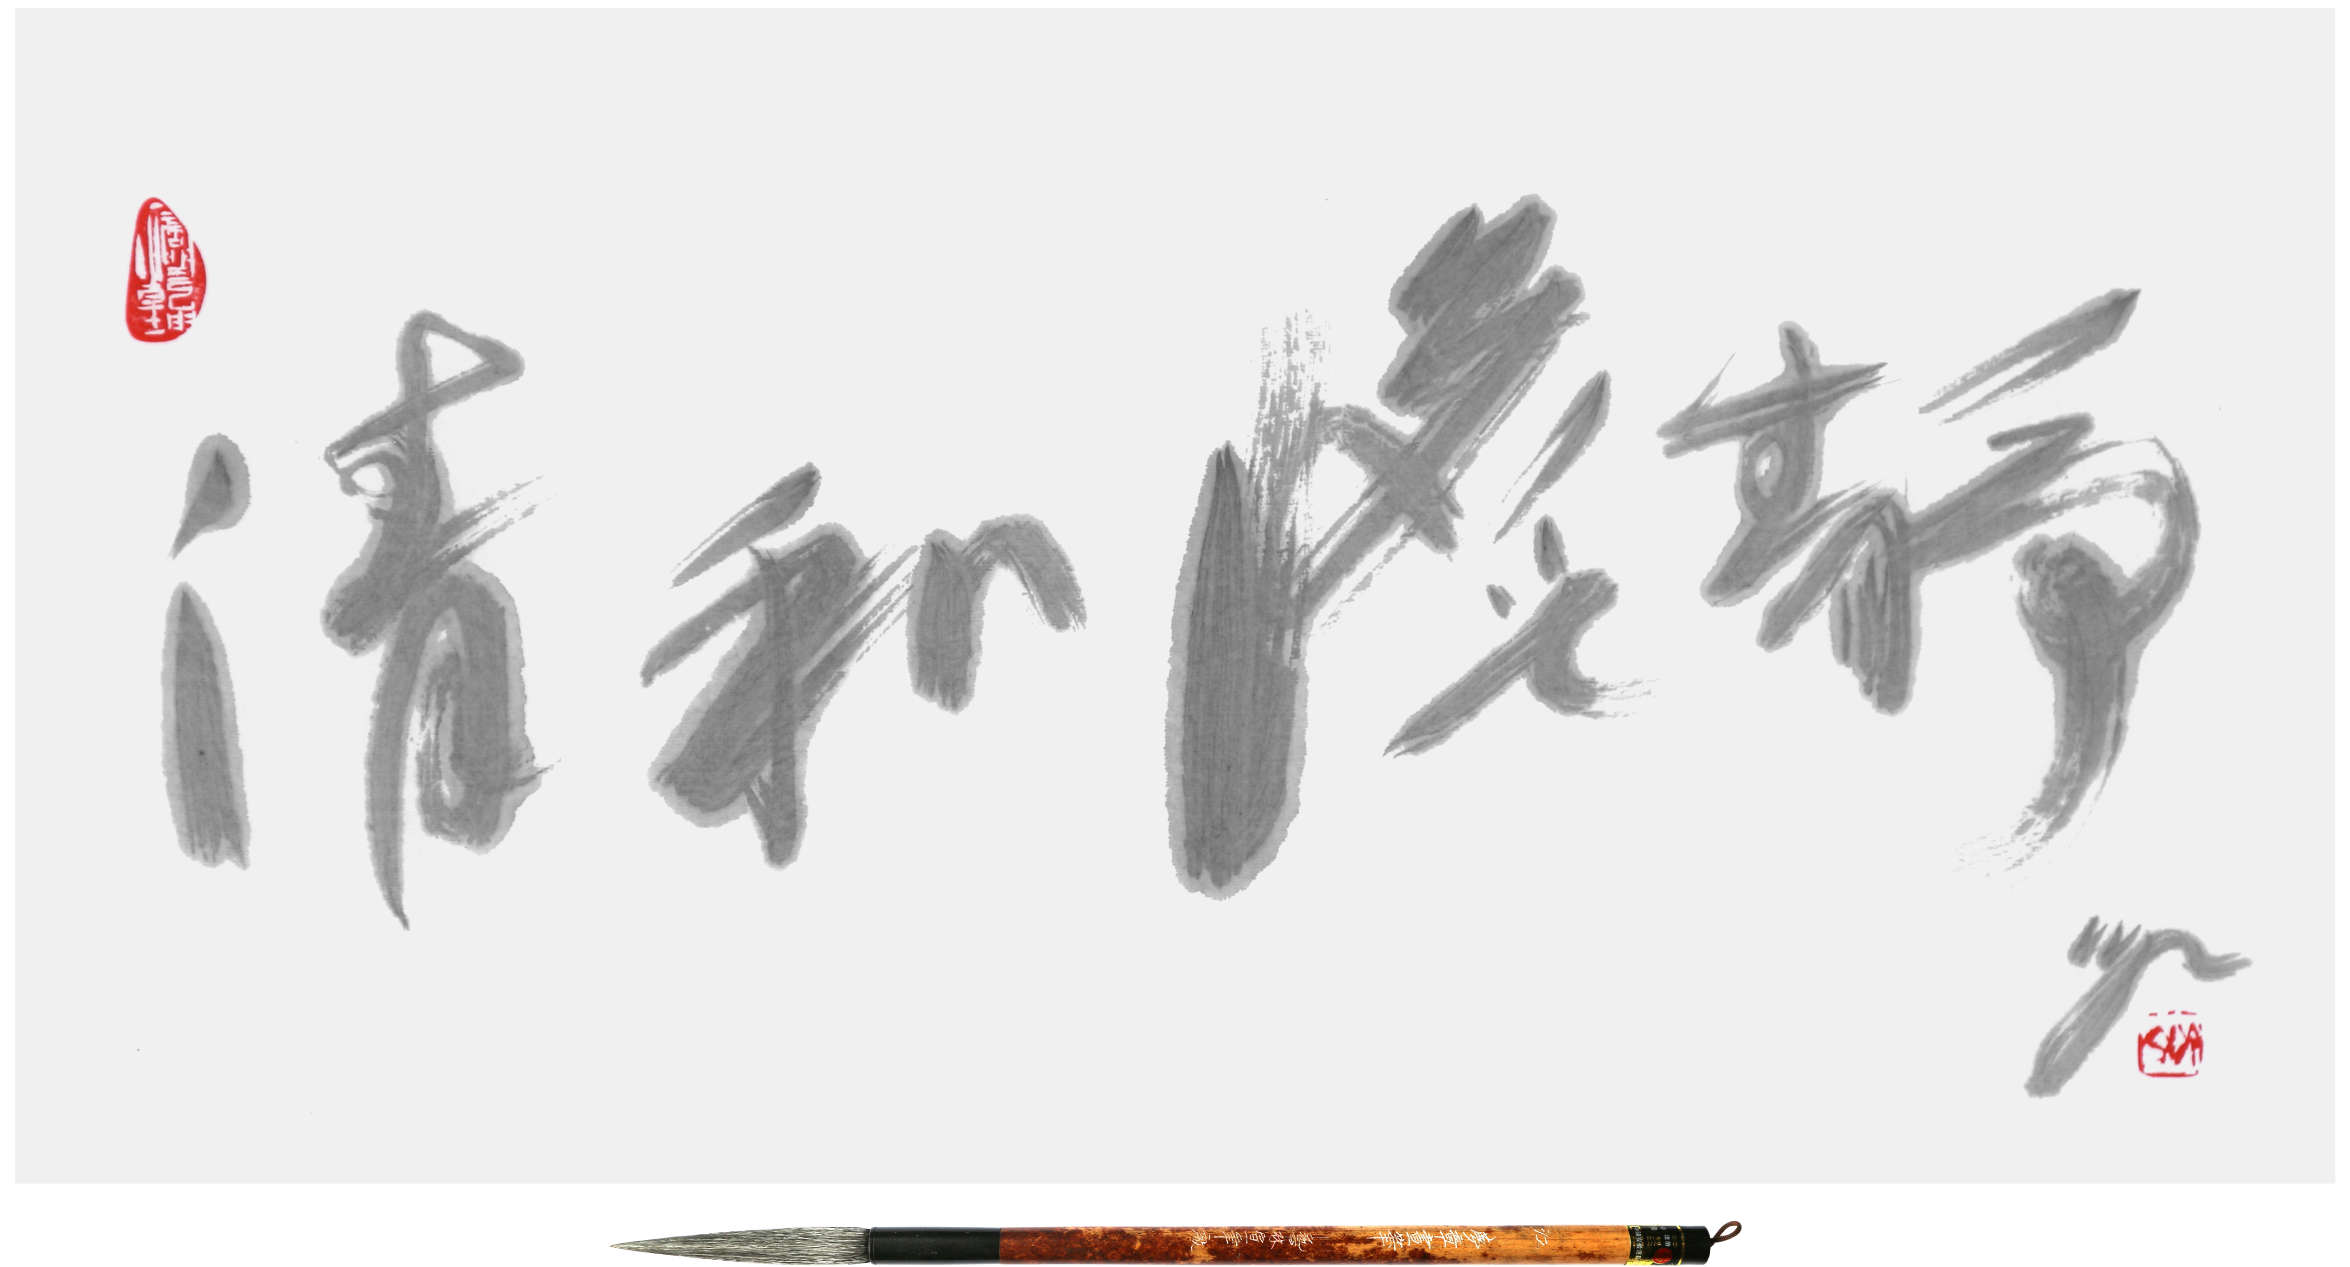 Sai Koh (Qi Hong)’s Freehand Brushwork Traditional Chinese Painting and Calligraphy on Tea: Chinese calligraphy (cursive script, light ink calligraphy), Chinese seal engraving (Chinese seal carving, Chinese seal cutting) - Tea Culture Is Focusing on Harmony and Tranquility and Aiming at Eliminating any Distractions instead of Seeking Fame and Wealth - ink on Xuan paper, 2017 - Pinyin: qing he dan jing; Chinese, 清和澹靜 紅 (Literary quotation: Grand Sight on Tea by Emperor Huizong in the Song Dynasty) - Seal: Sai (Qi); Chinese, 齊 A Drop of Water Moistens the Universe; Chinese, 一滴潤乾坤 - Xuan Paper: Mian Liao Mian Lian, 69×34cm - Brush: Goat Hair Long Head Brush, Meng Zhang Hua Bi · Jiang